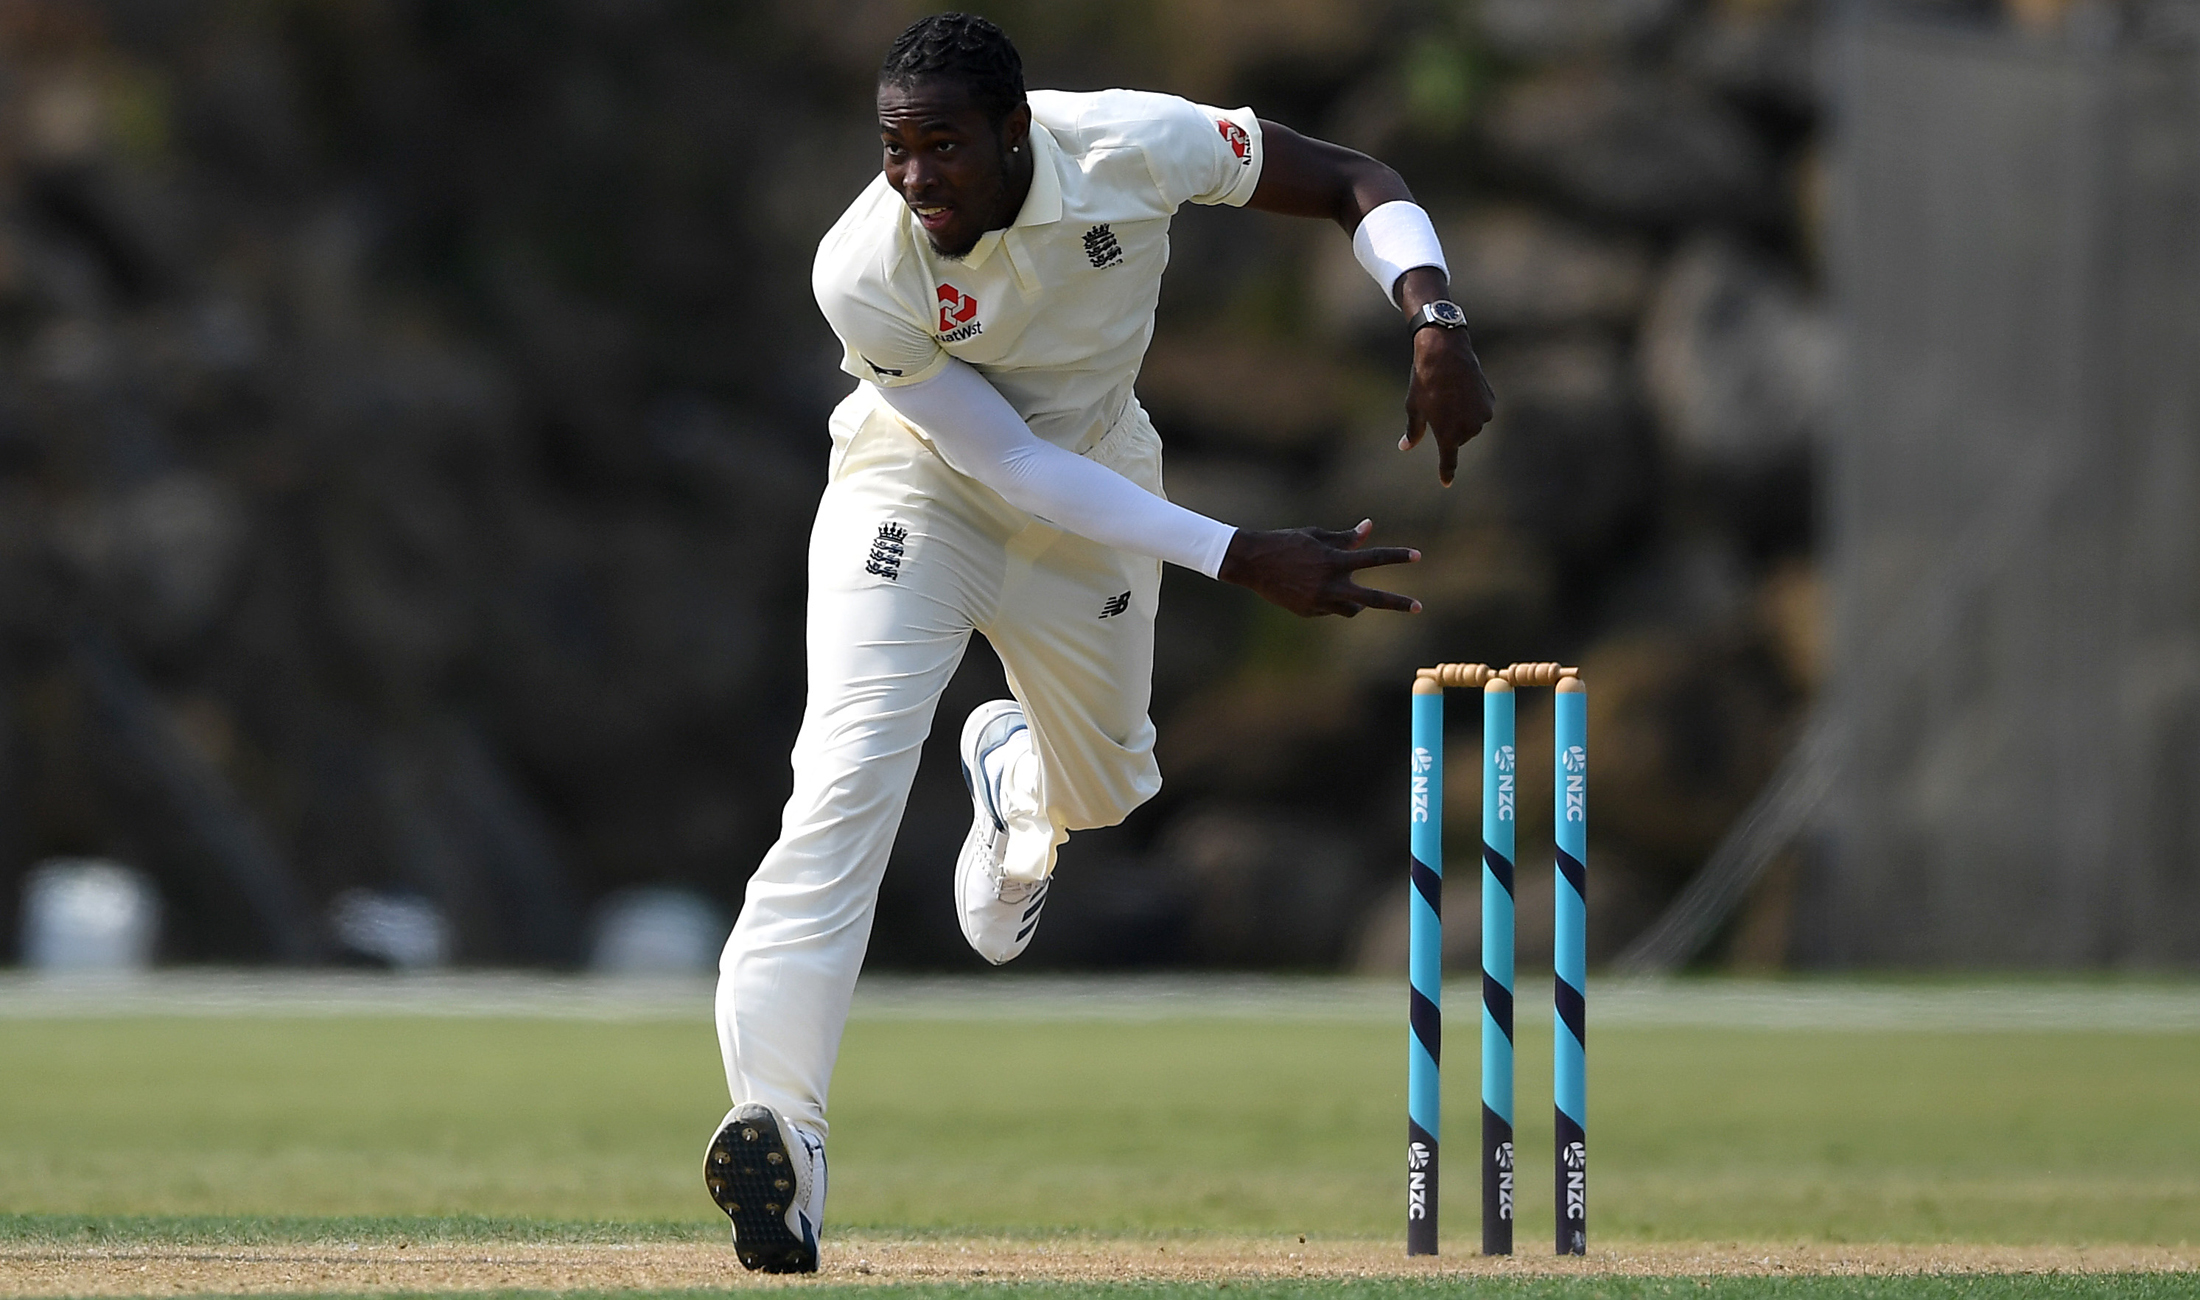 Joe Root wants England paceman Jofra Archer to have more belief in his own abilities.